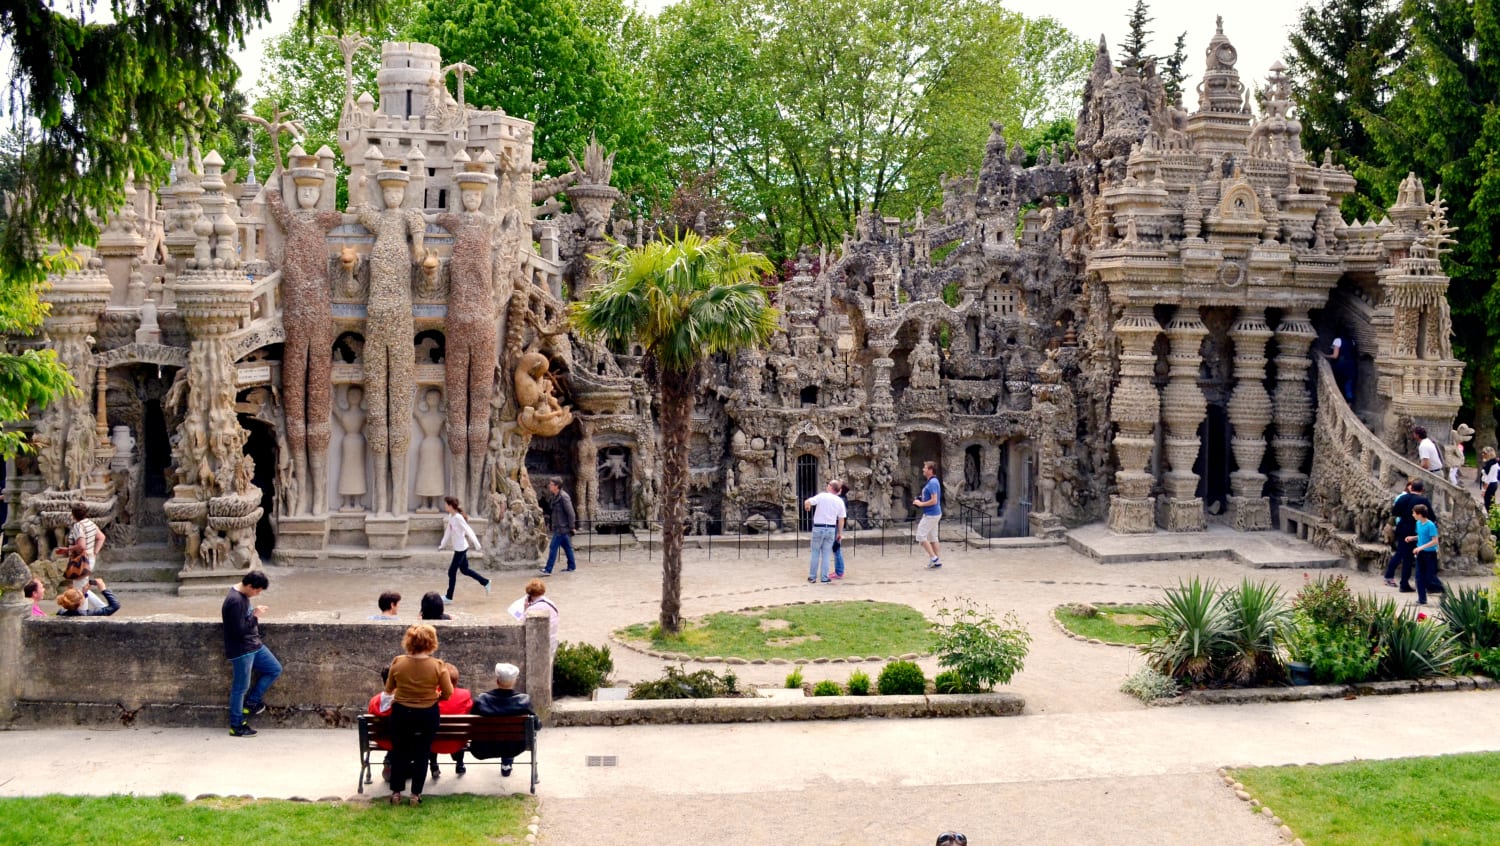 The Palais Idéal du facteur Cheval (Ideal Palace of the mailman Cheval), Hauterives, France. Built by one man from 1879 to 1912 and considered a masterpiece of Naive art